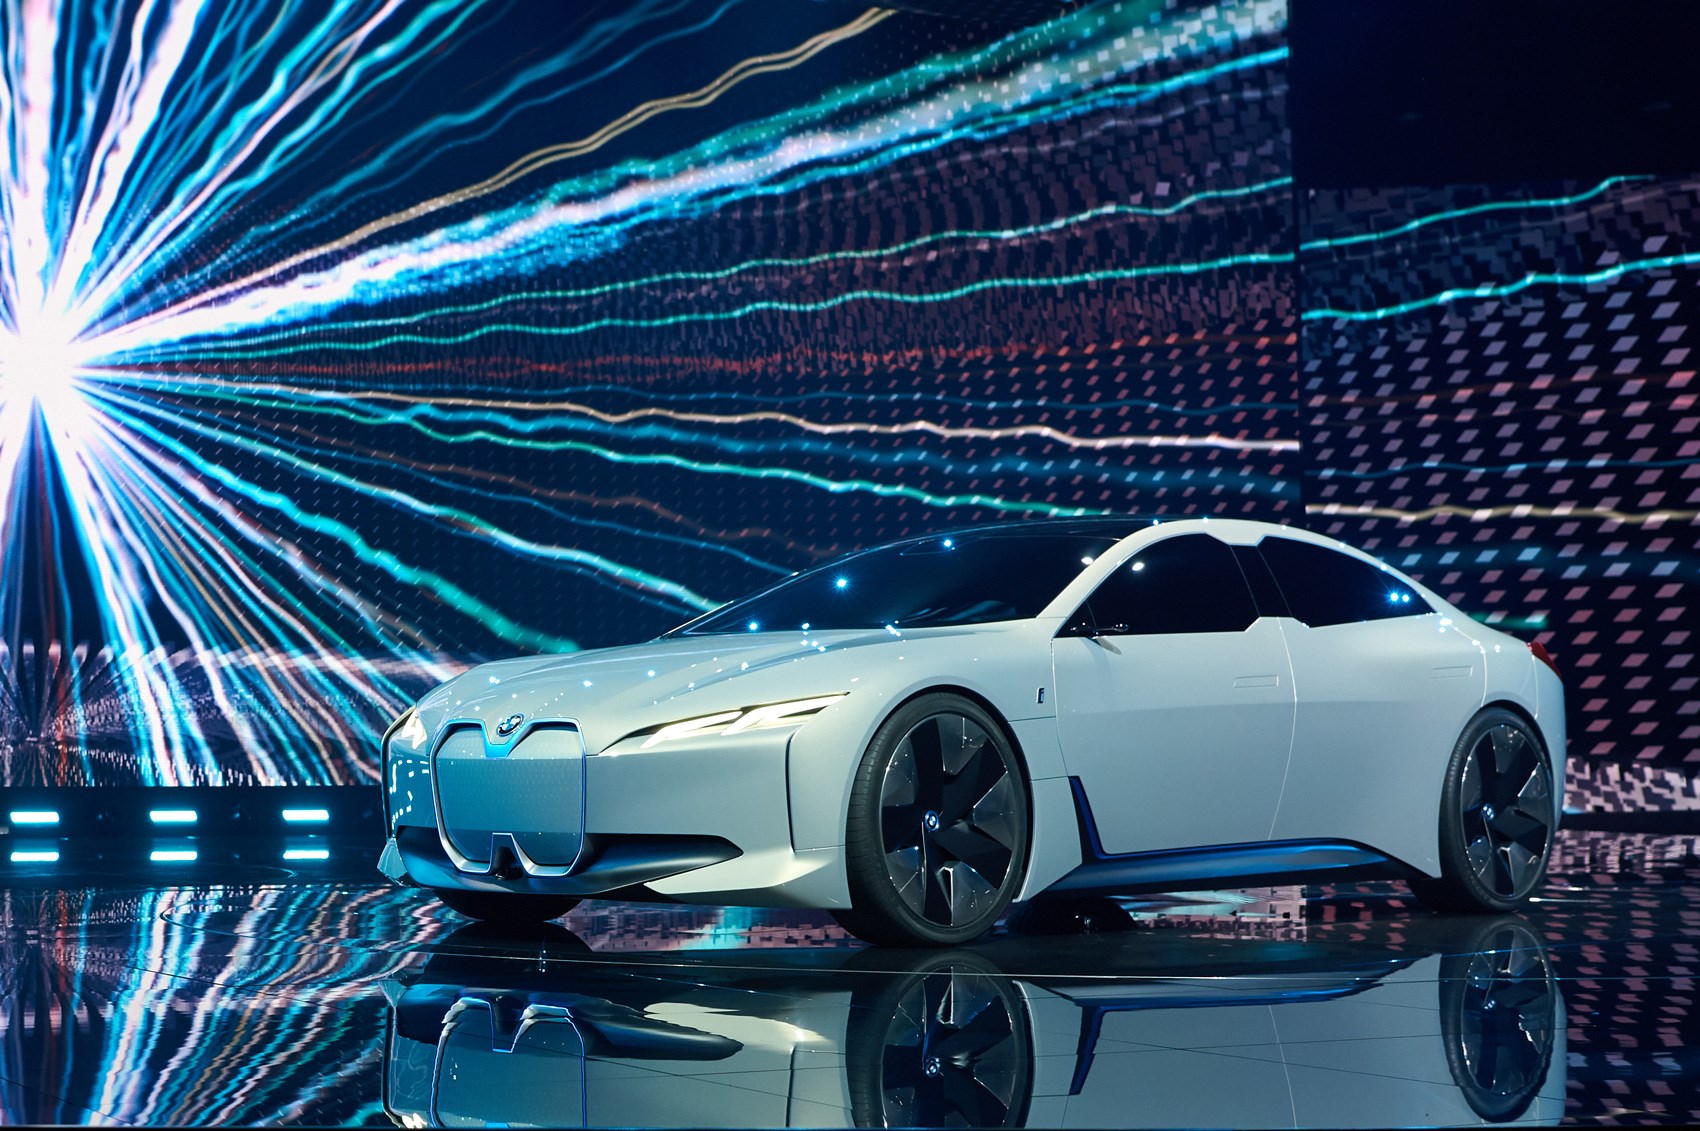 BMW i Vision Dynamics concept: is this the new BMW i5? | CAR Magazine1700 x 1131